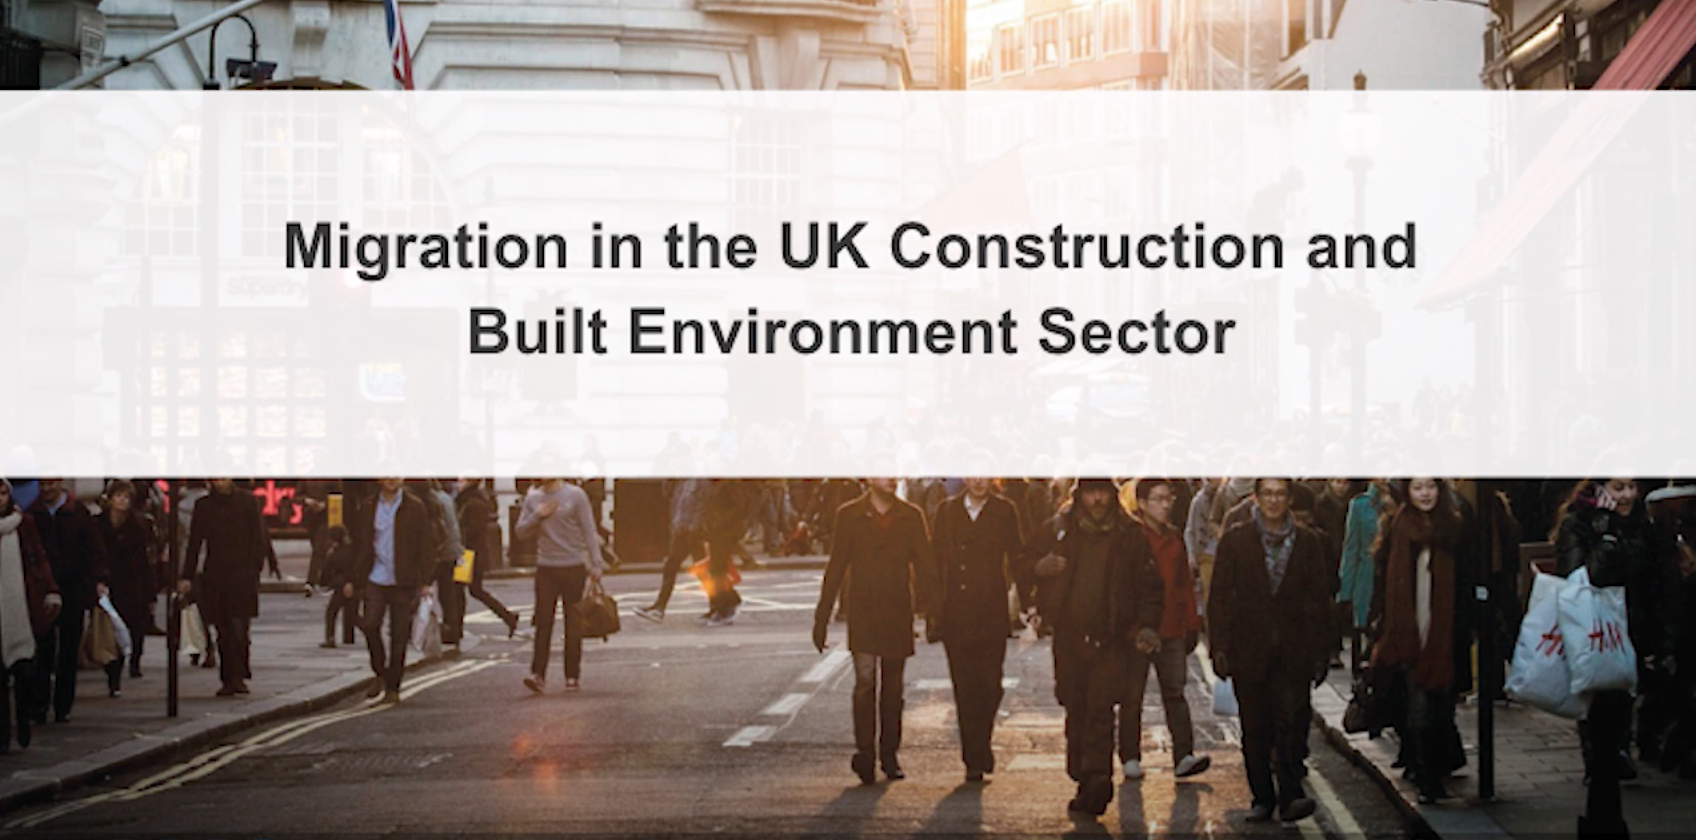 Migration in the UK Construction and Built Environment Sector